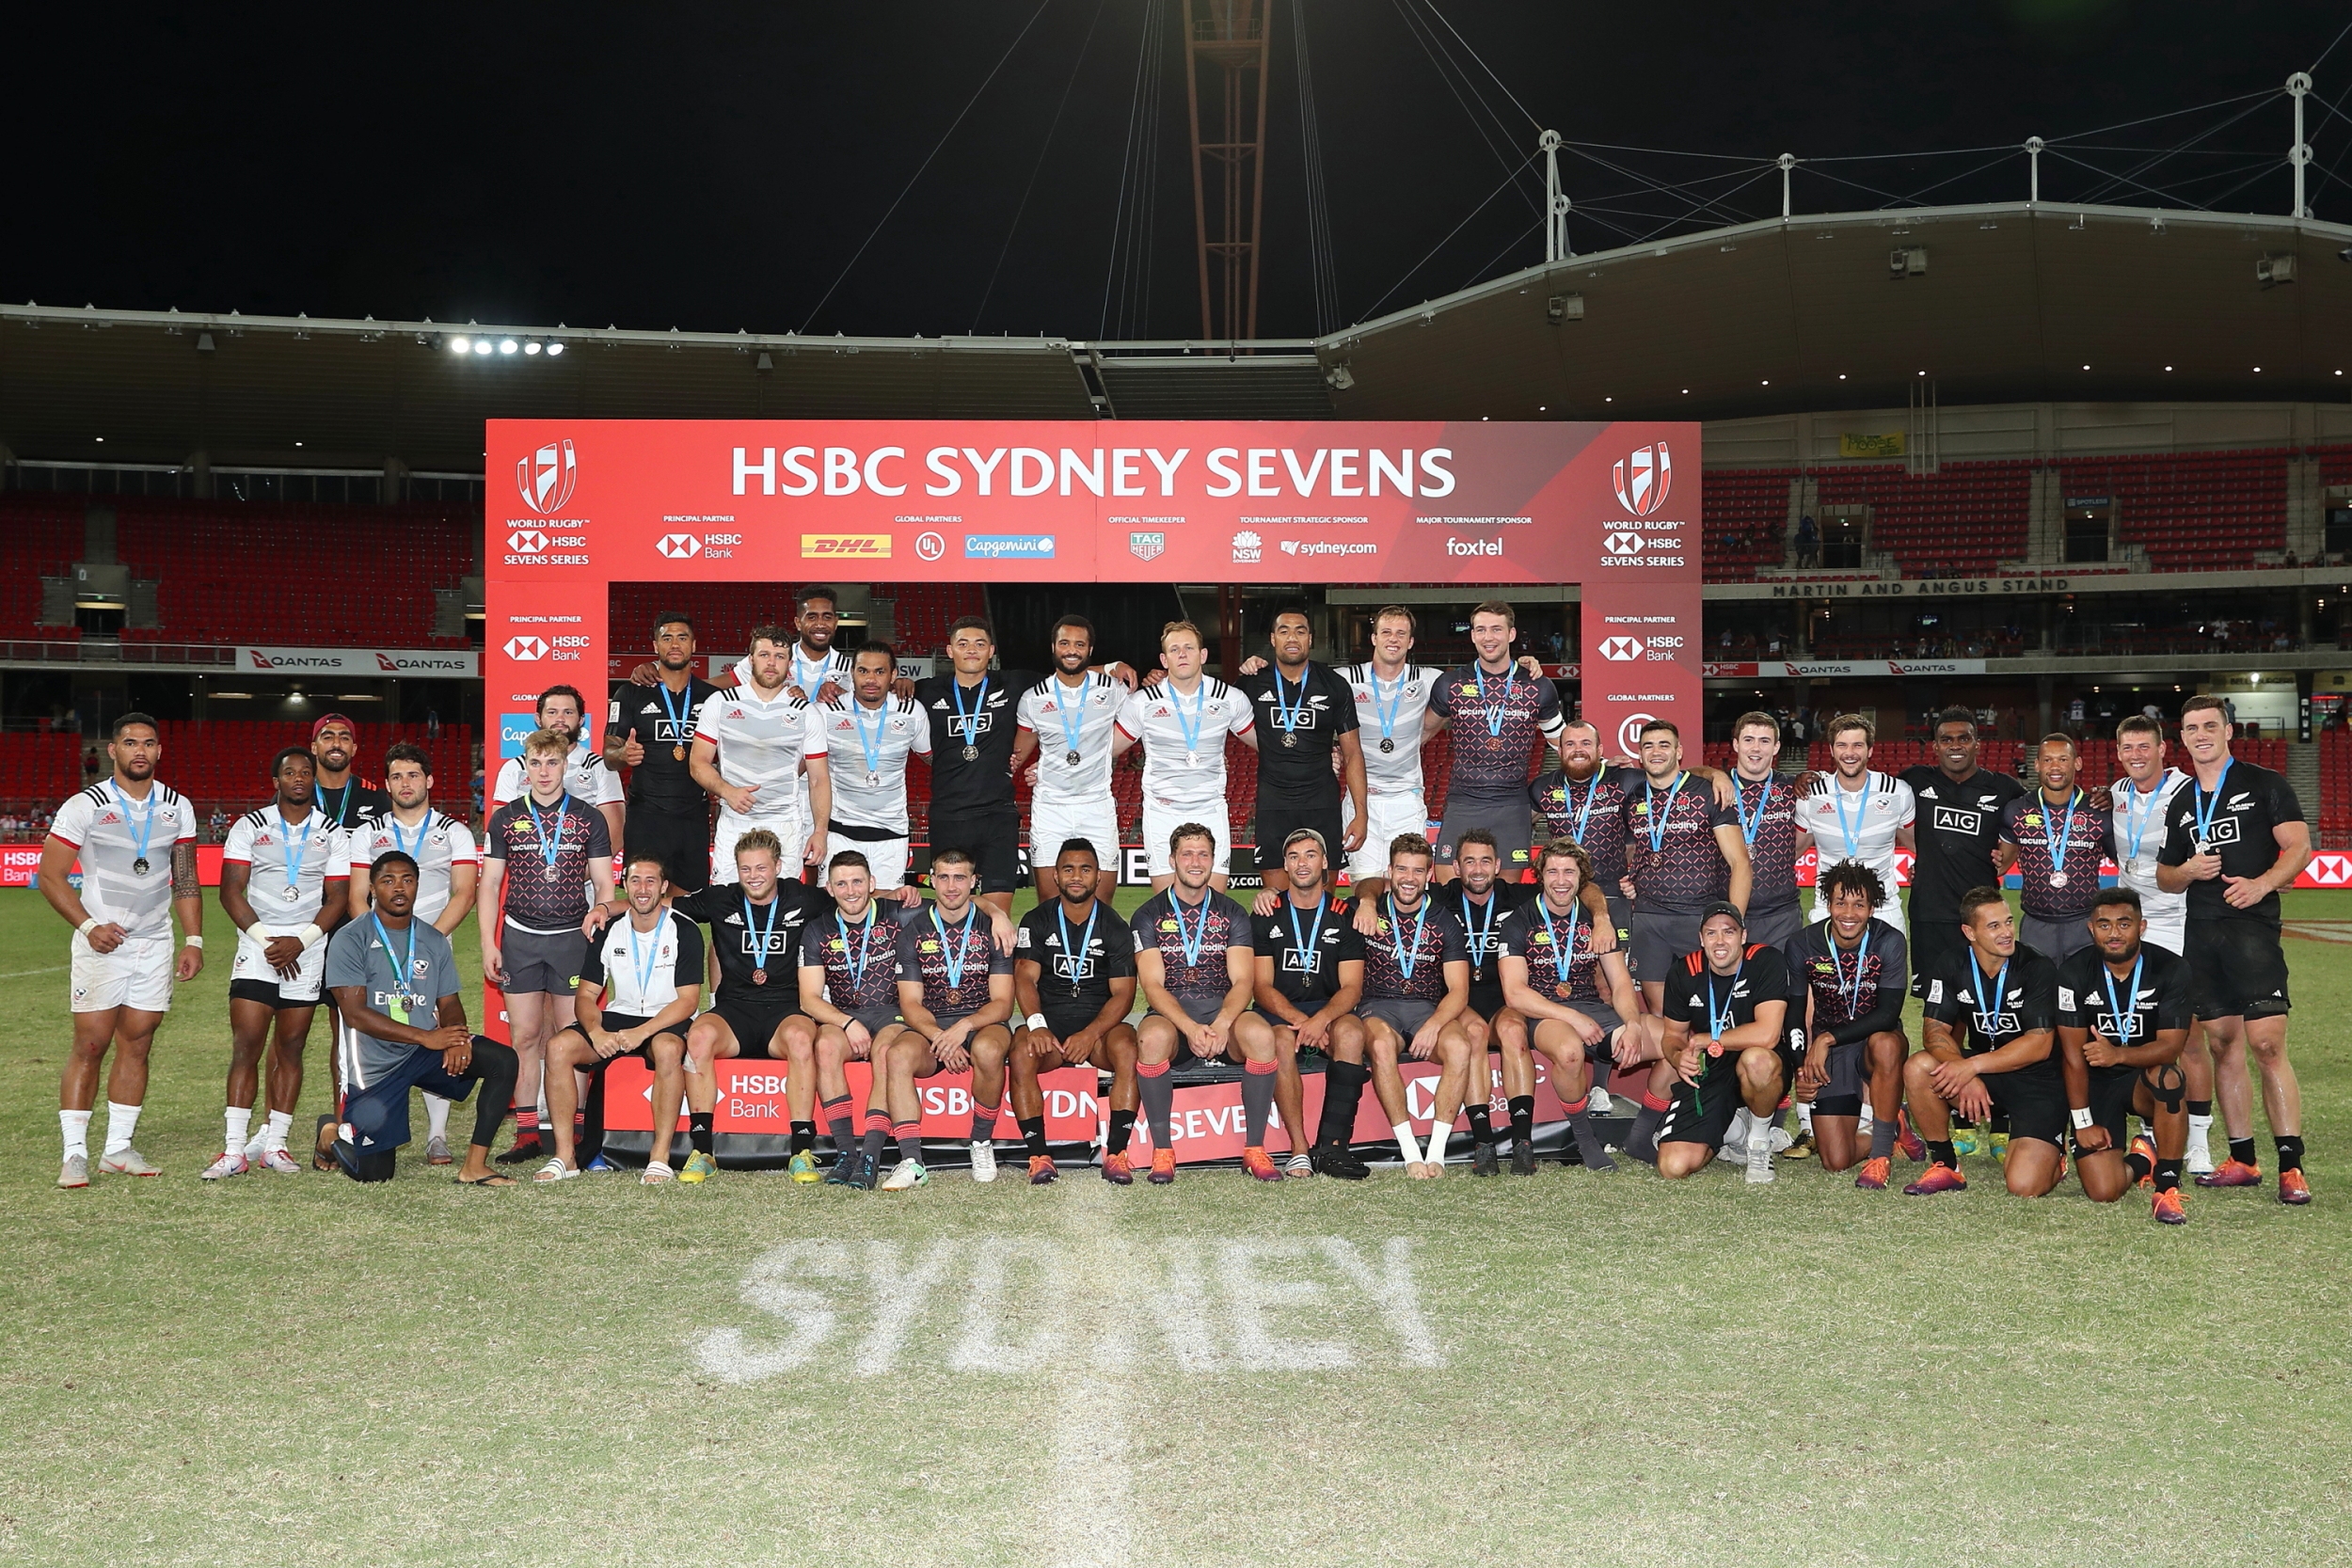 Gold, silver, bronze medalists New Zealand, USA, and England pose for a group photo on day two of the HSBC World Rugby Sevens Series in Sydney on 3 February, 2019. Photo credit: Mike Lee - KLC fotos for World Rugby. Click to enlarge.